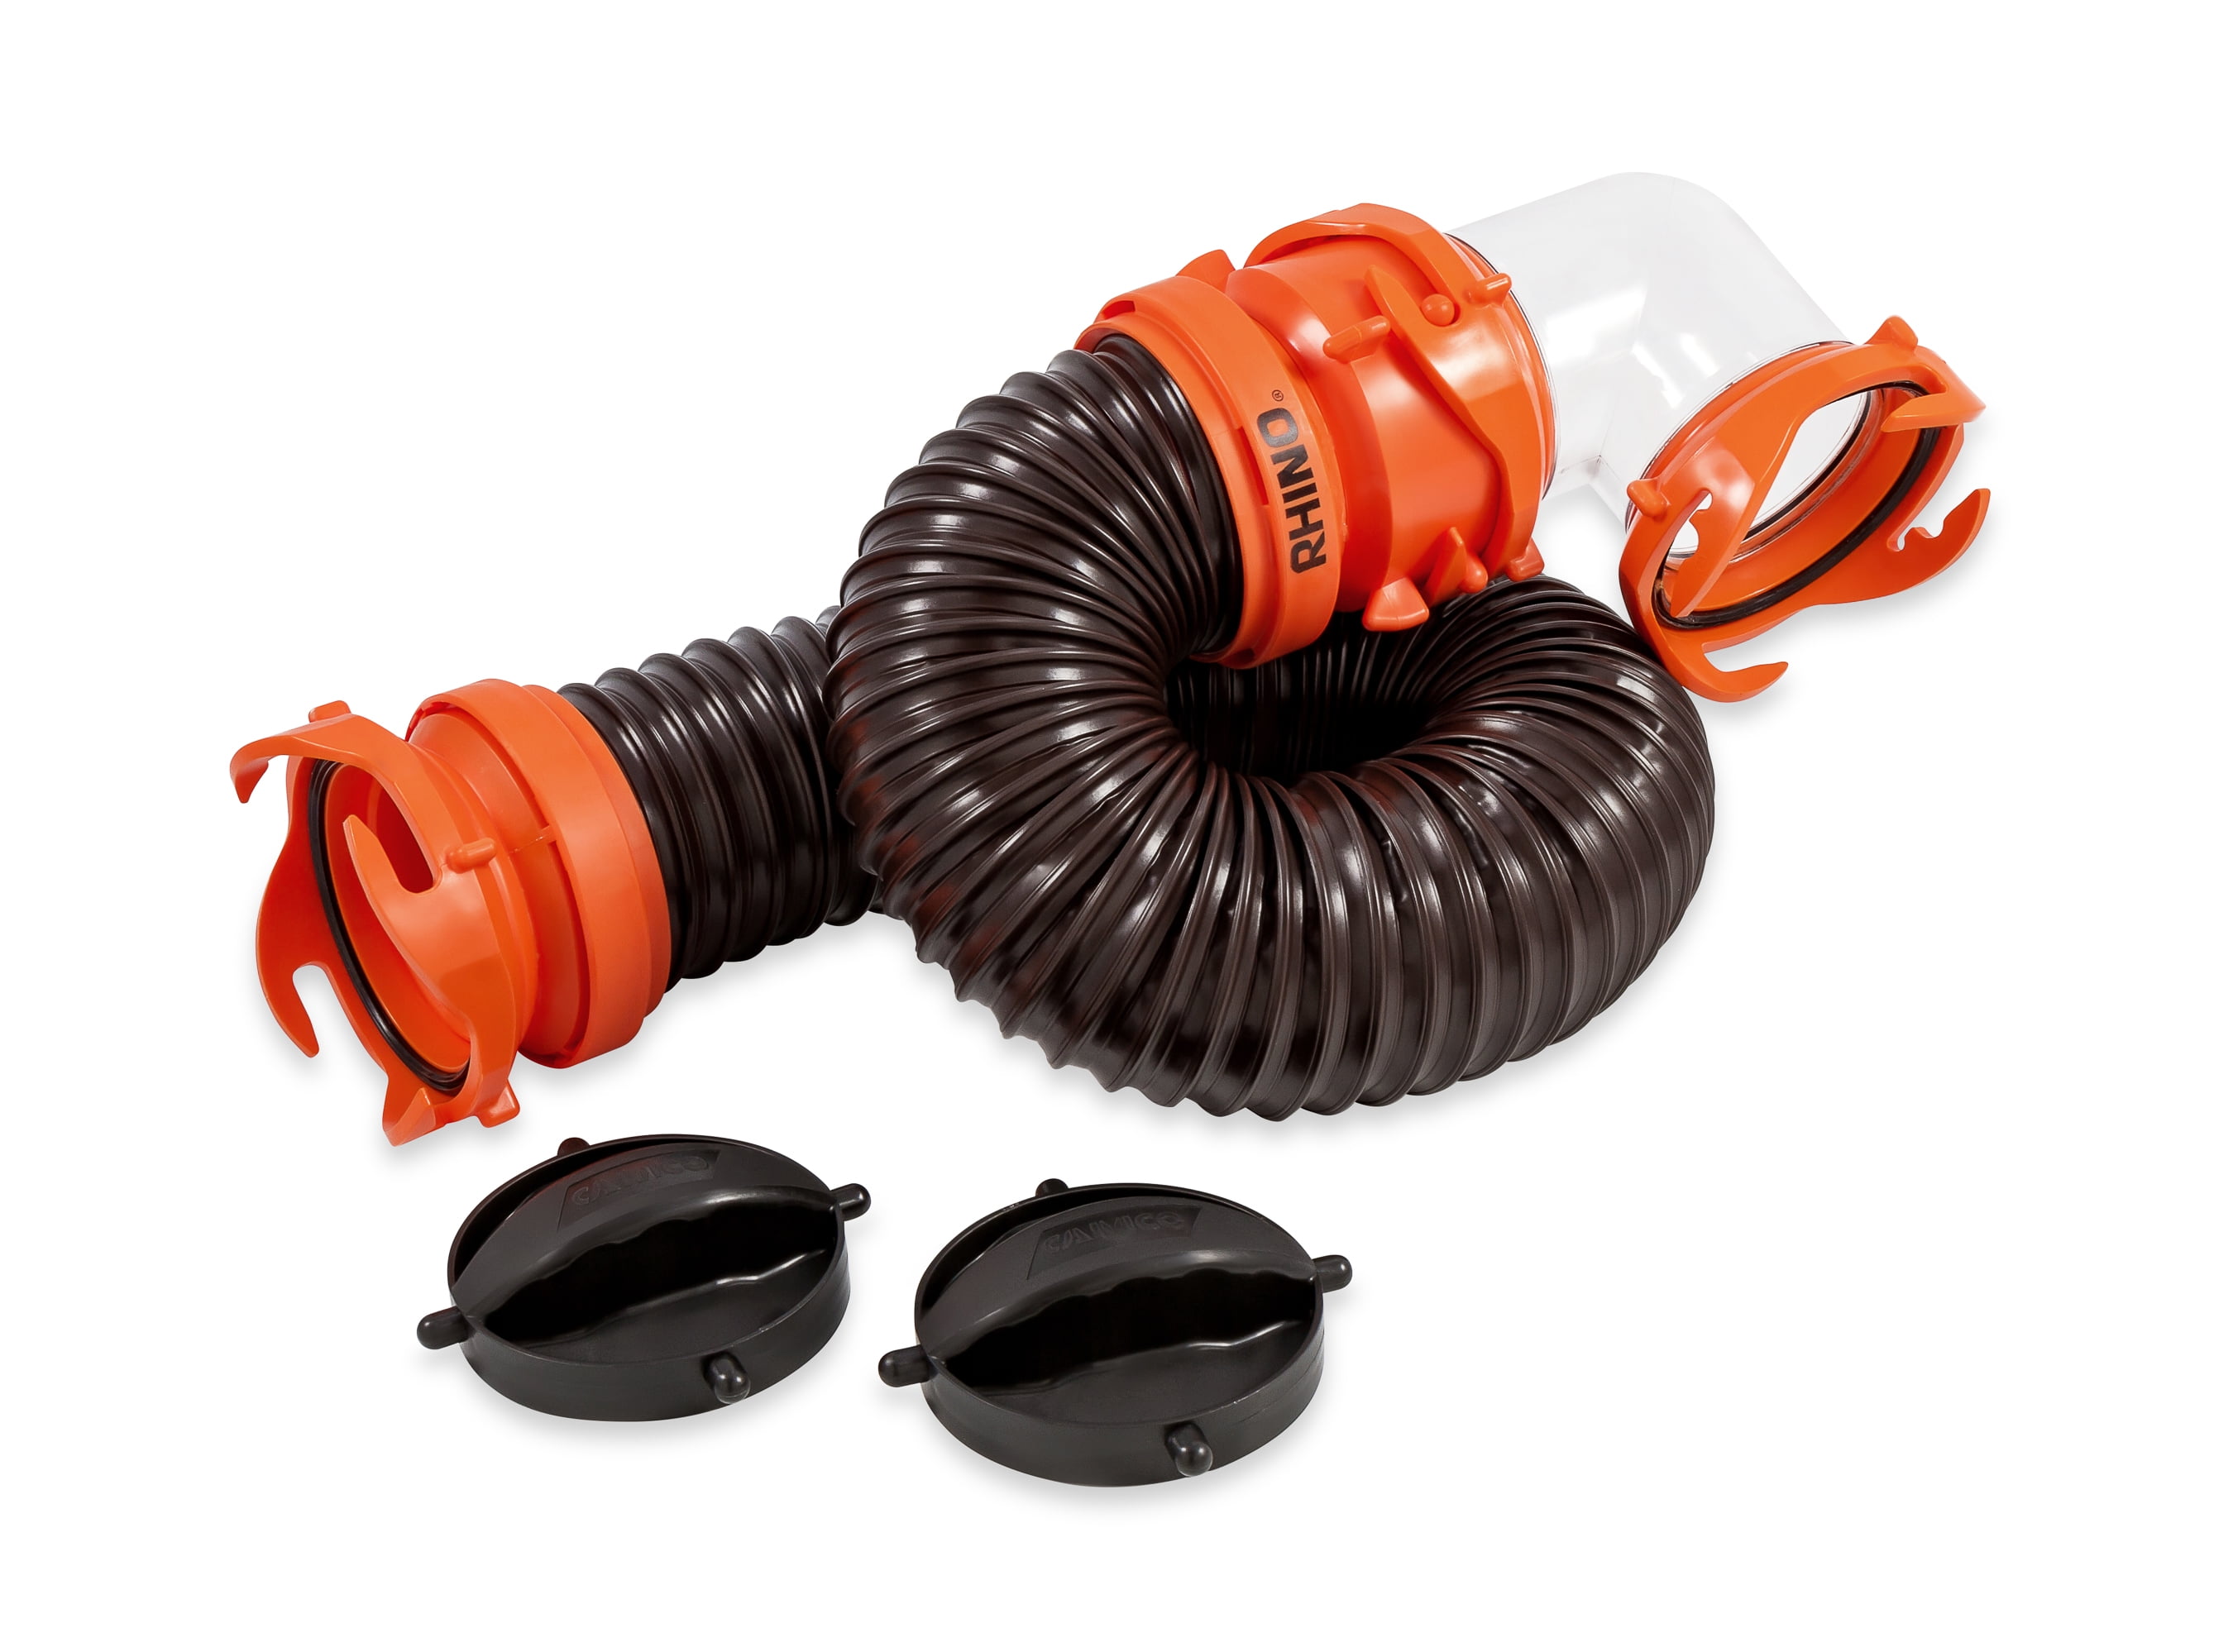 Rhinoflex Tote Tank Hose Kit Connects To Your Portable Includes 2 Storage Caps 